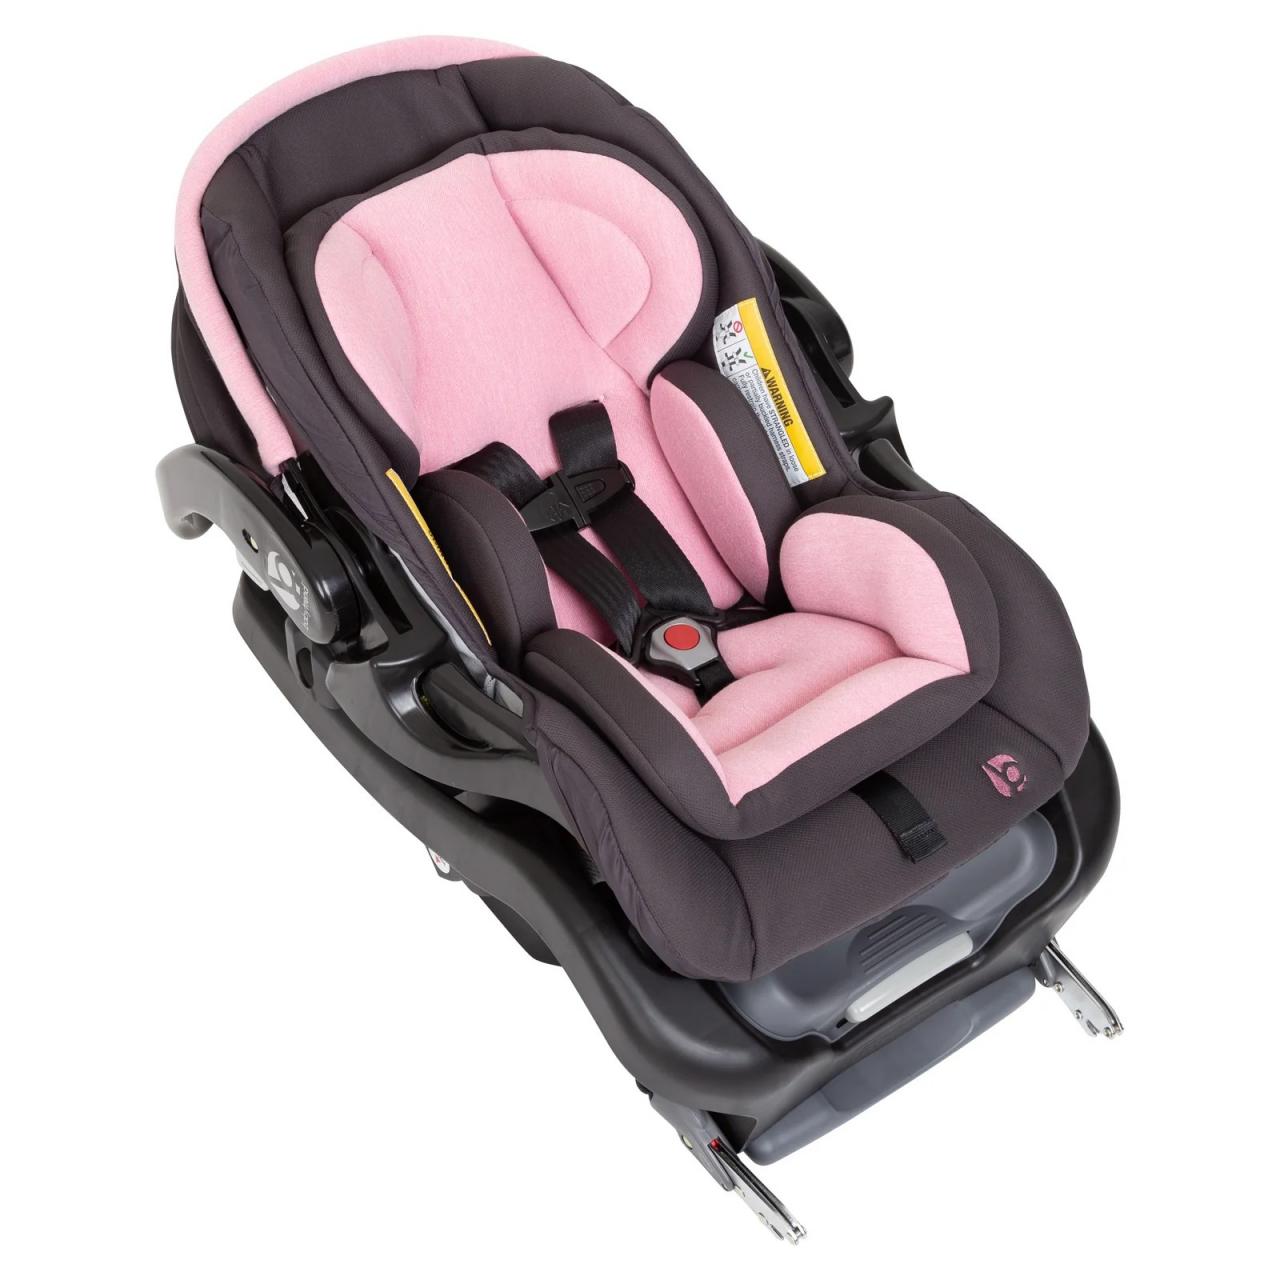 Expert Guide, Installing Your Baby Trend Car Seat Safely and Correctly